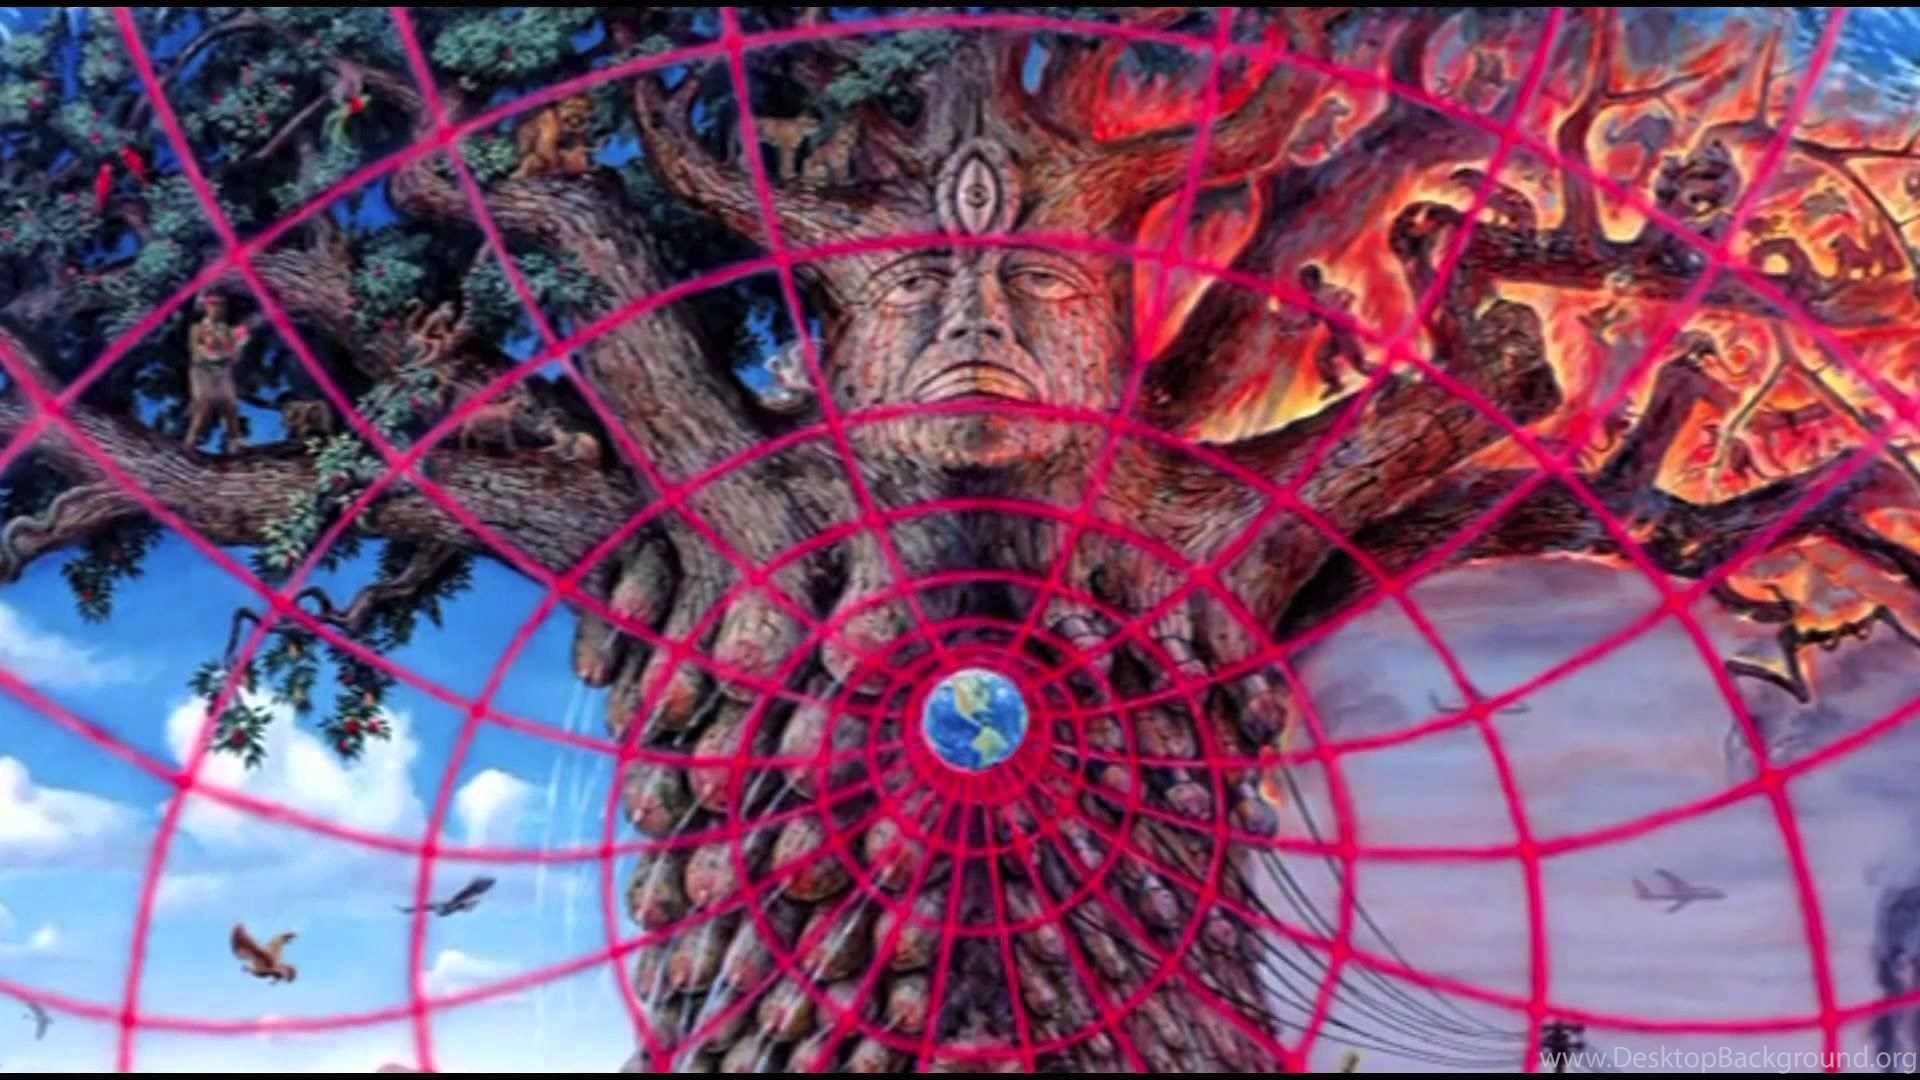 Book: 'The Mission Of Art' By Alex Grey Desktop Backgrounds.